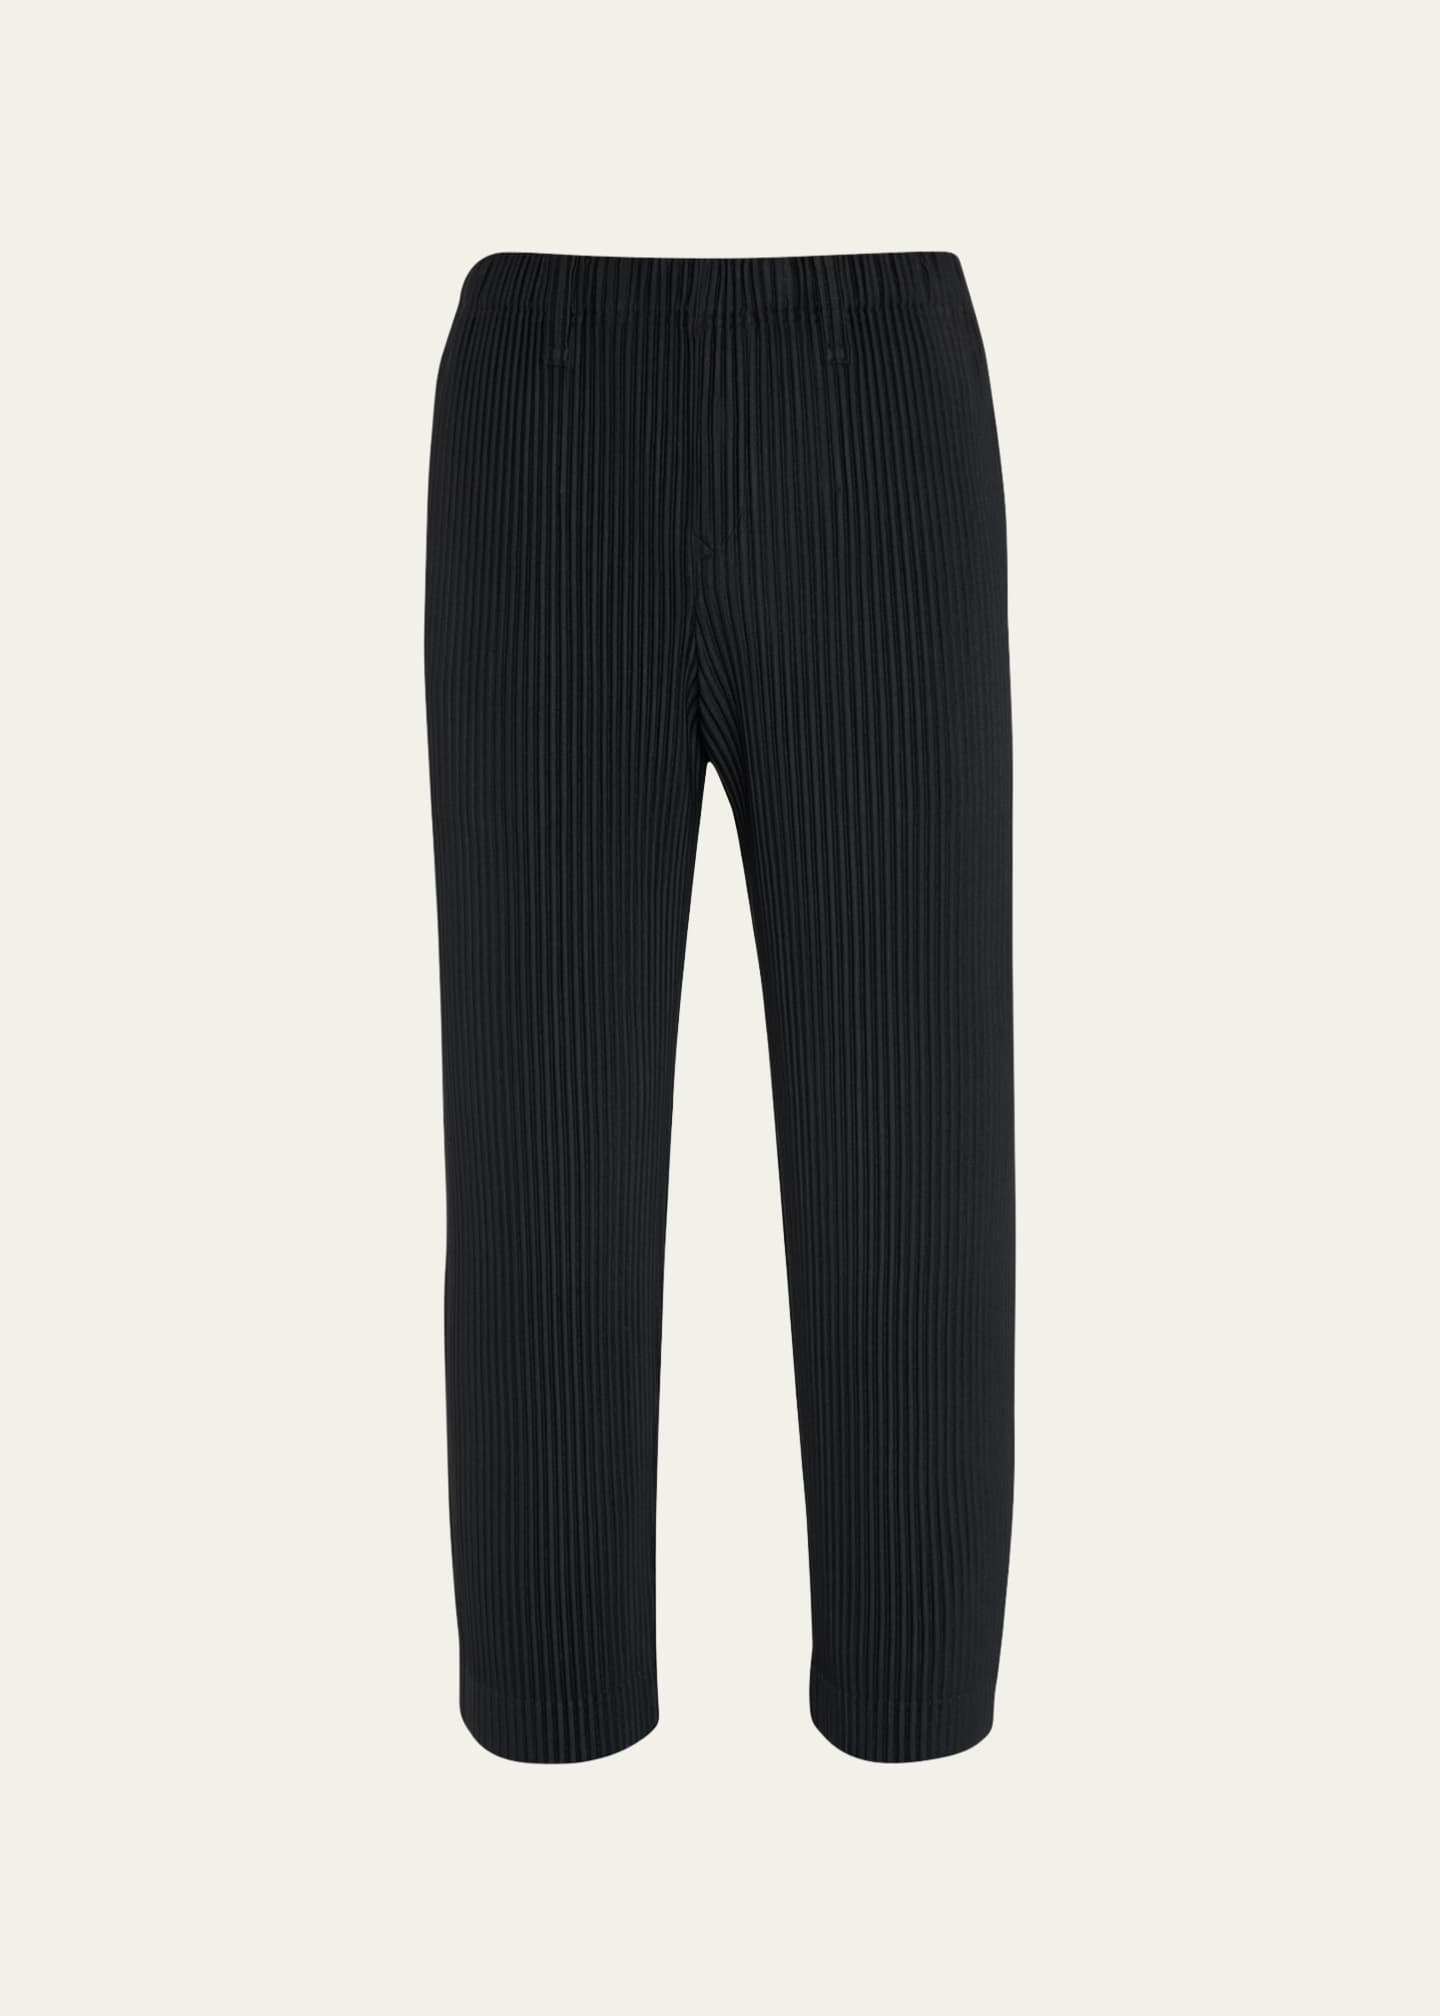 Homme Plisse Issey Miyake Men's Pleated Polyester Pants - Bergdorf